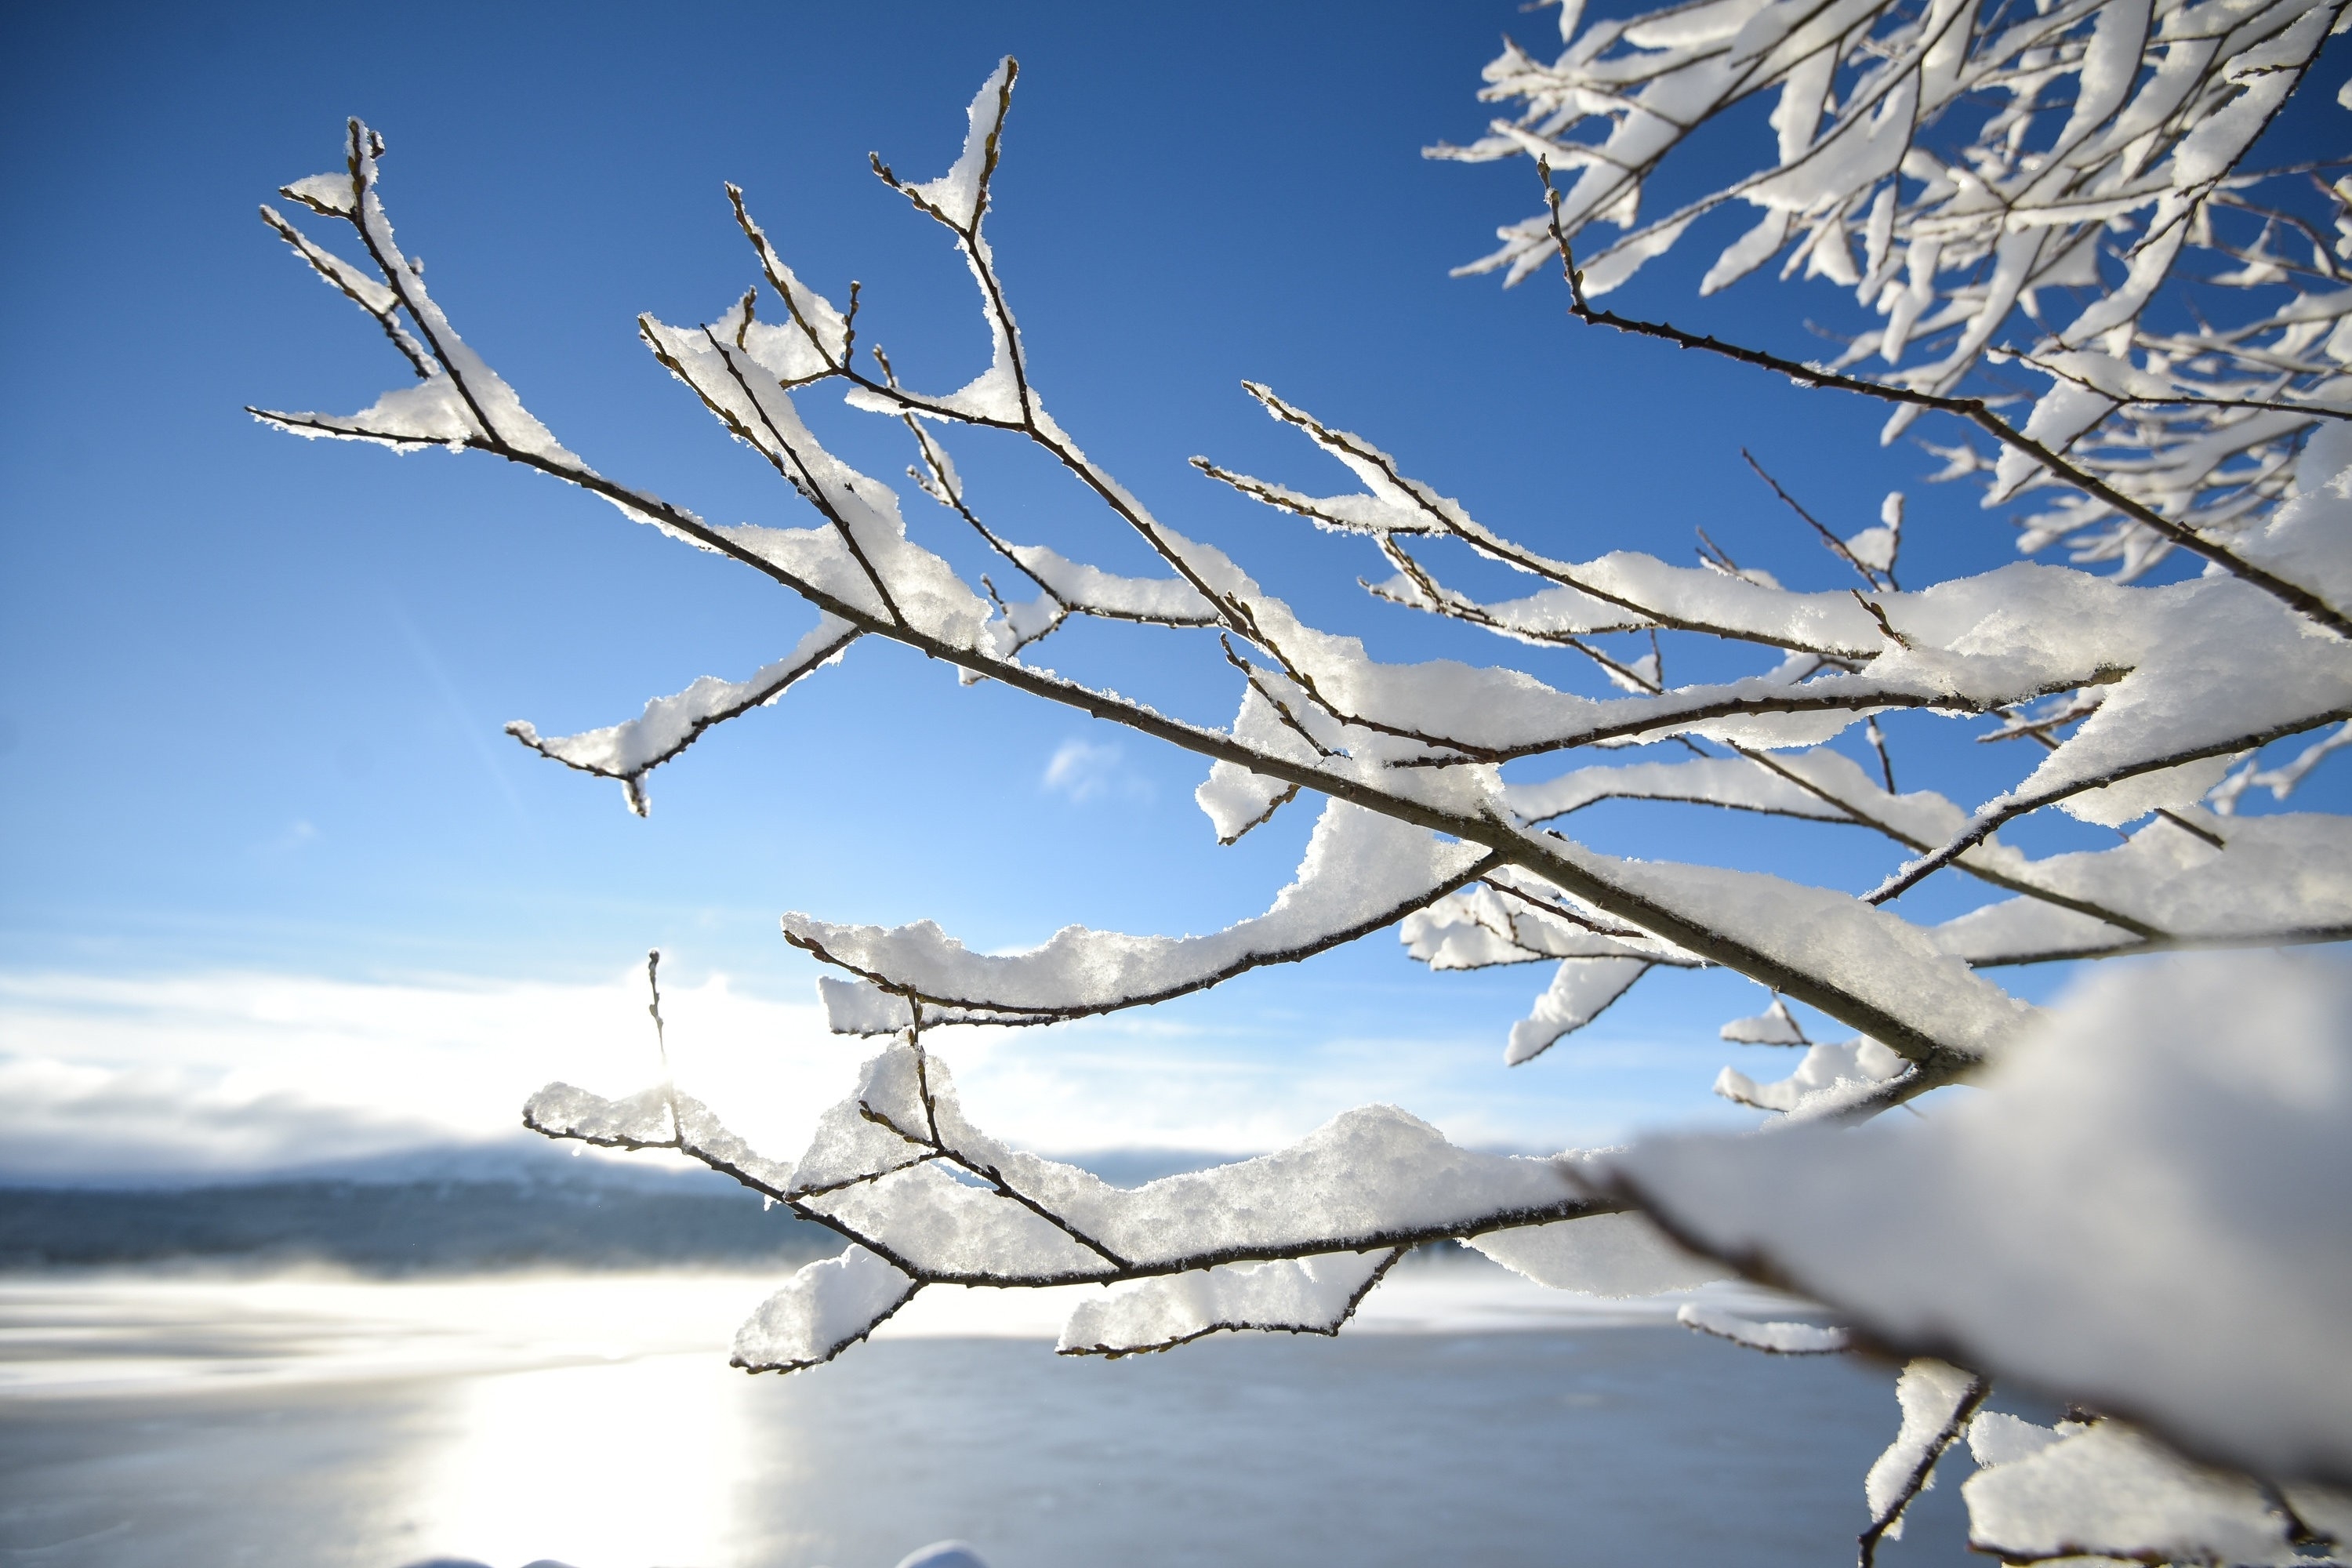 Snow covered clings to branches on the shores of Loch Morlich near Aviemore, Scotland on December 14 2015. Last night, Sunday, Scotland's coldest temperature for this Winter was recorded in Dalwhinnie at -8.7C. Up to 15cm of snow fell in Aviemore overnight and local schools were closed.